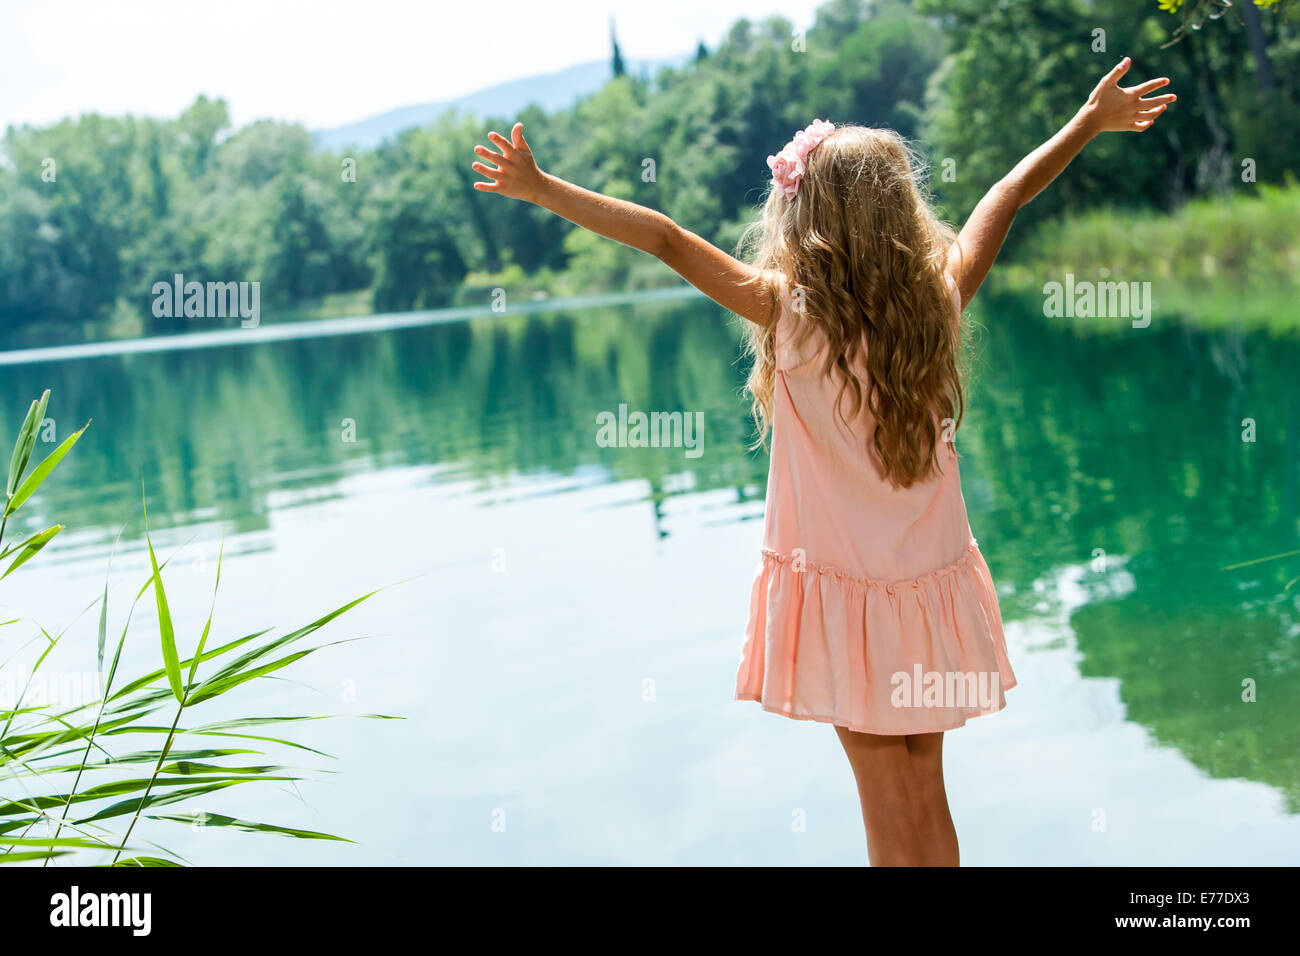 Young girl in pink dress standing with open arms at lakeside. Stock Photo